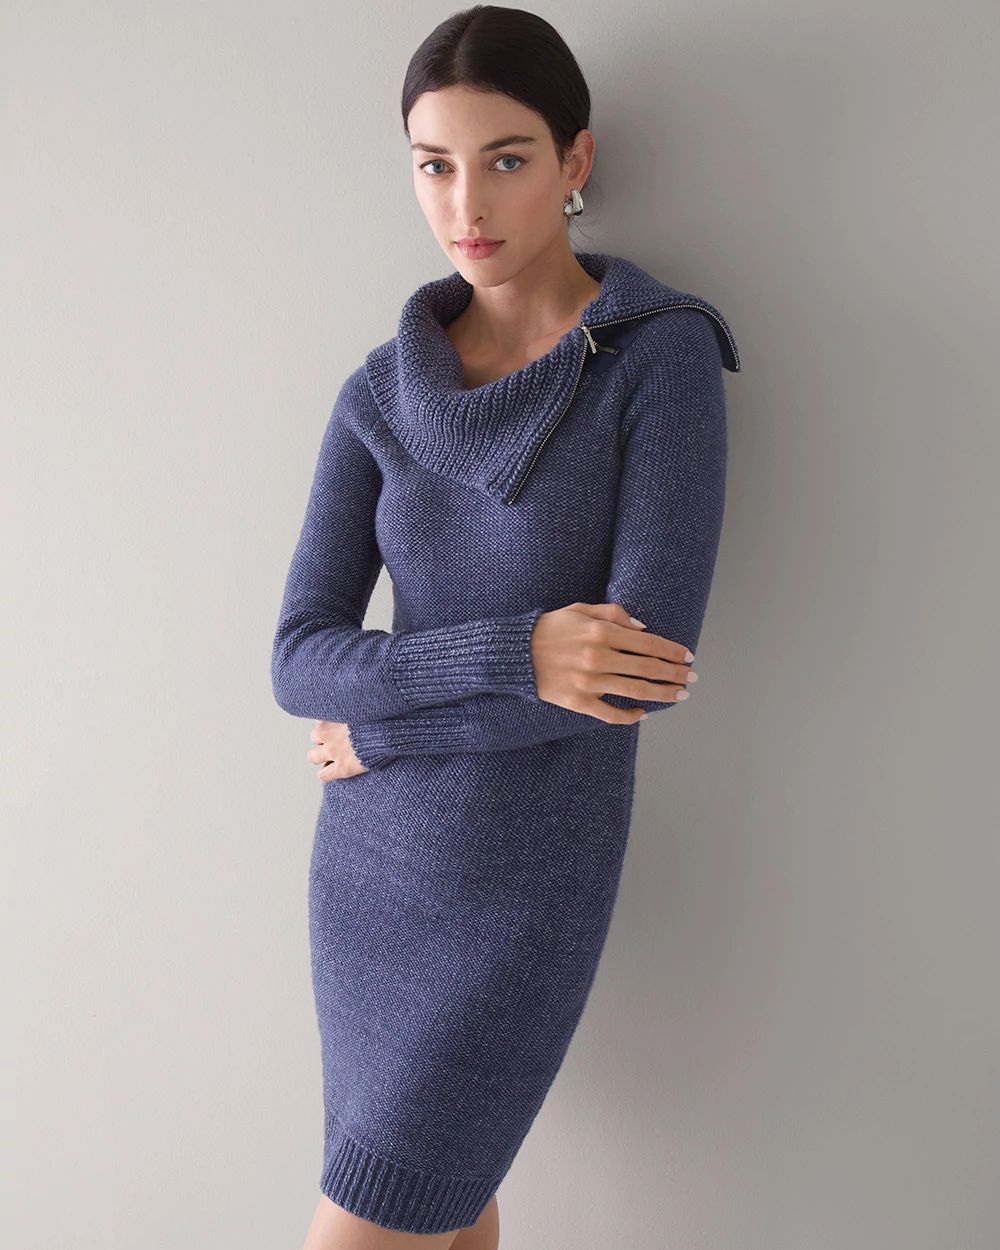 Zip Neck Sweater Dress click to view larger image.